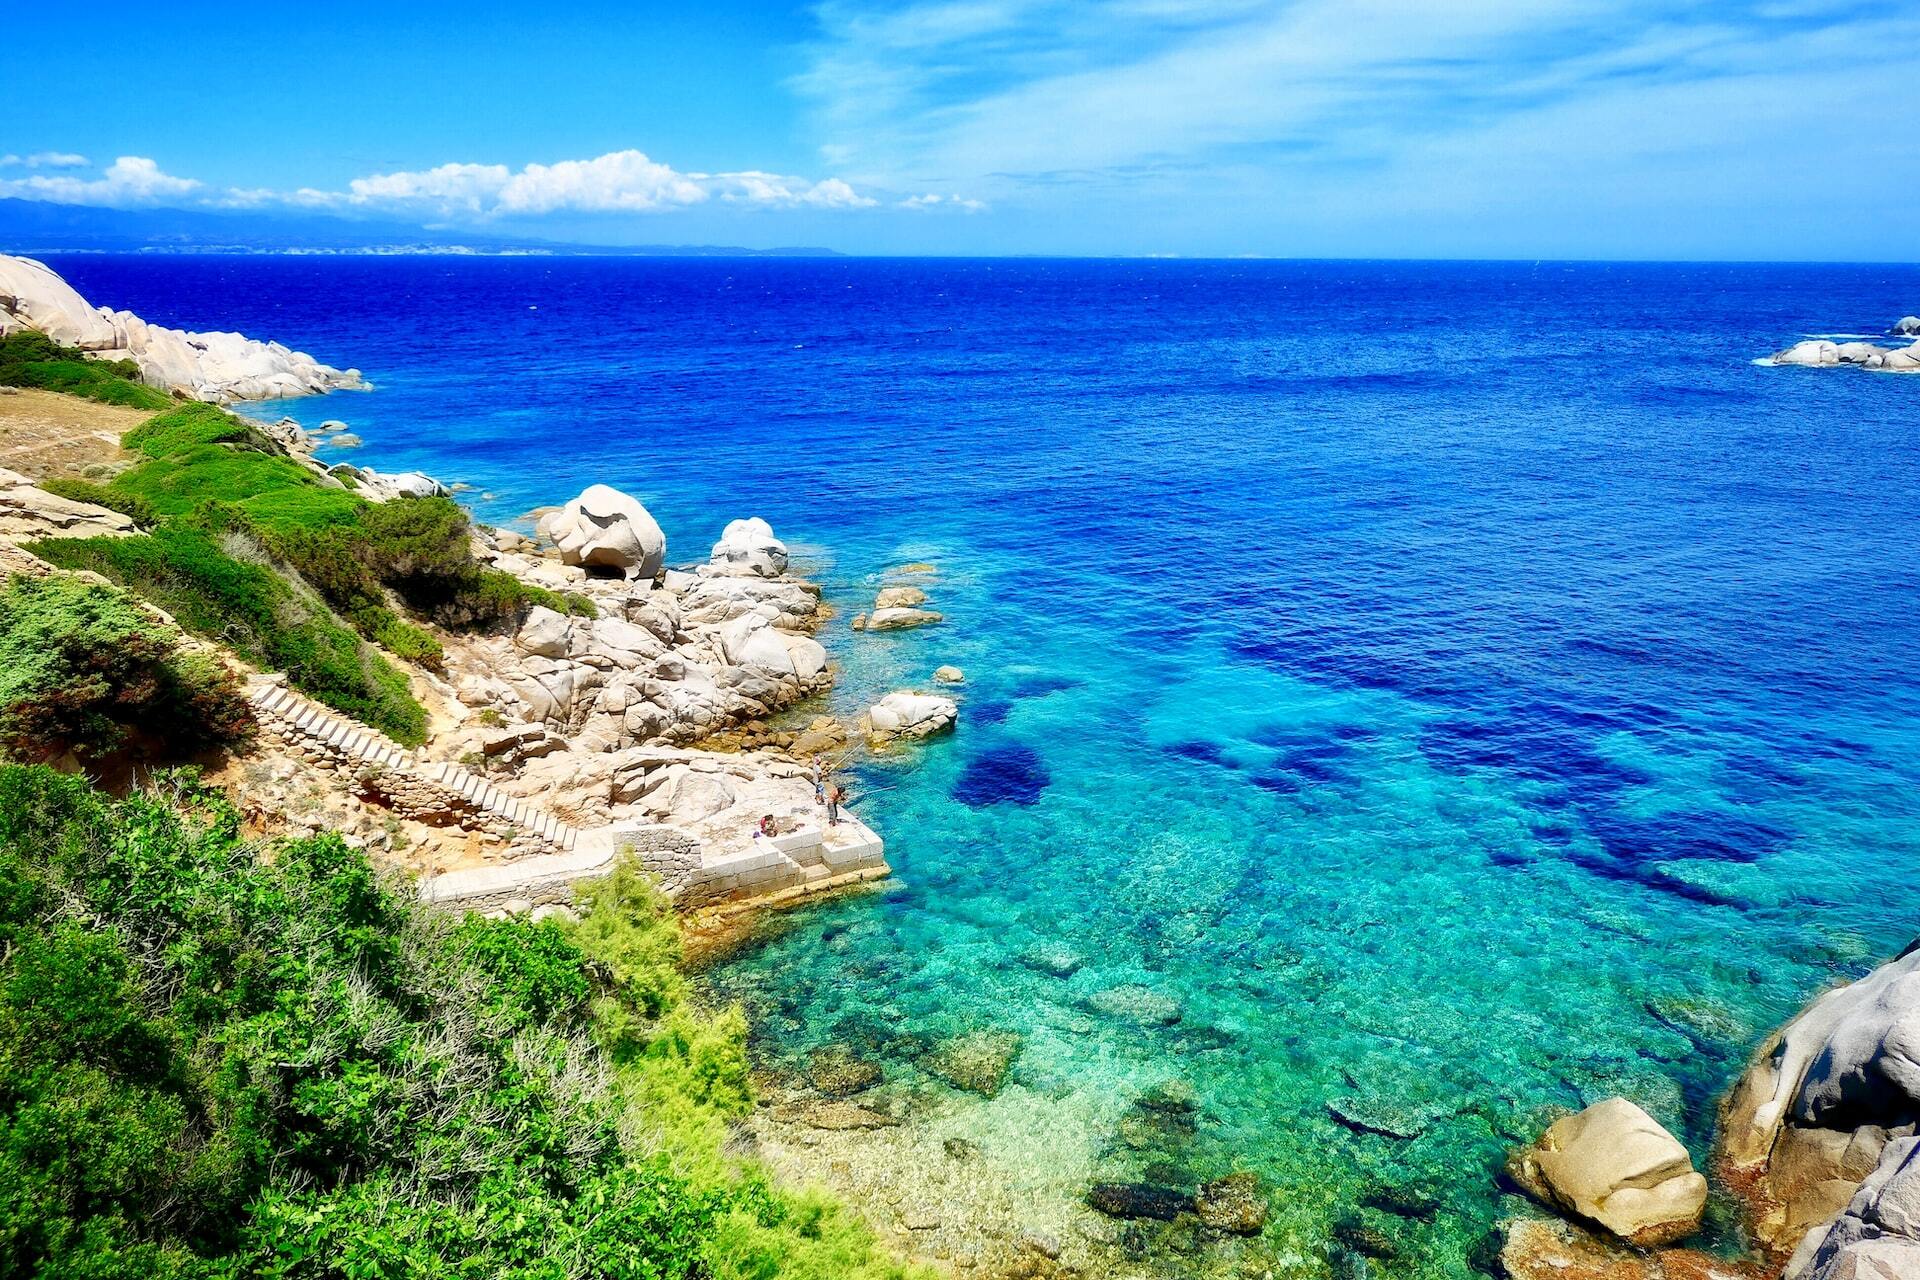 You could get paid £12,500 to move to Sardinia!